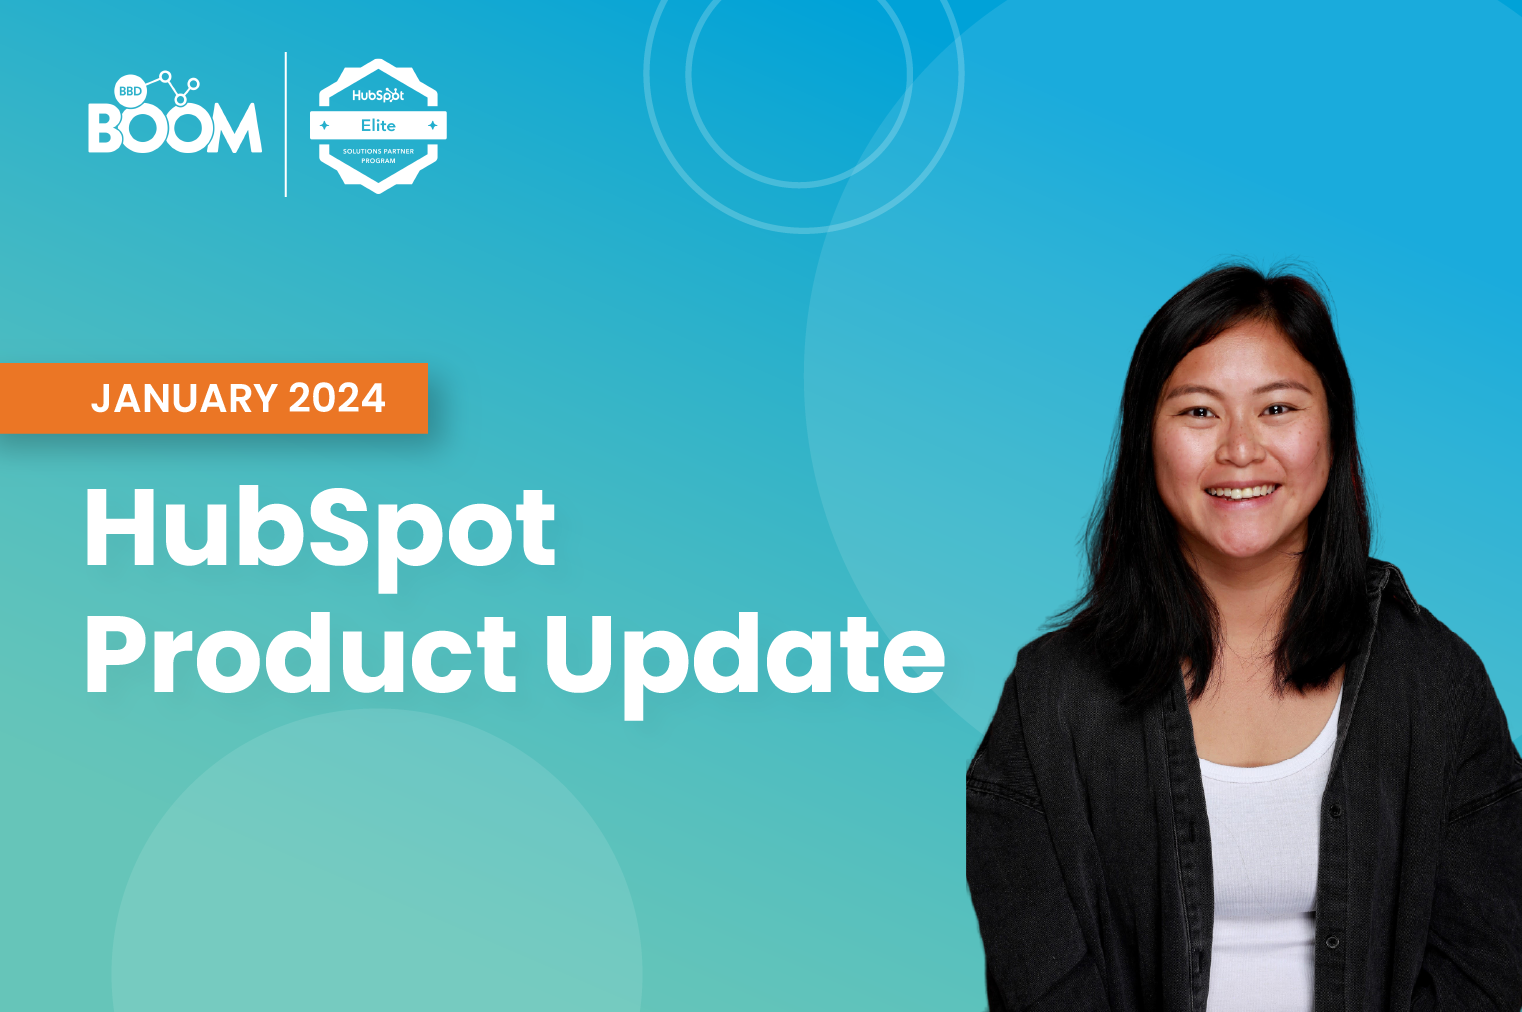 HubSpot Product Update: January 2024